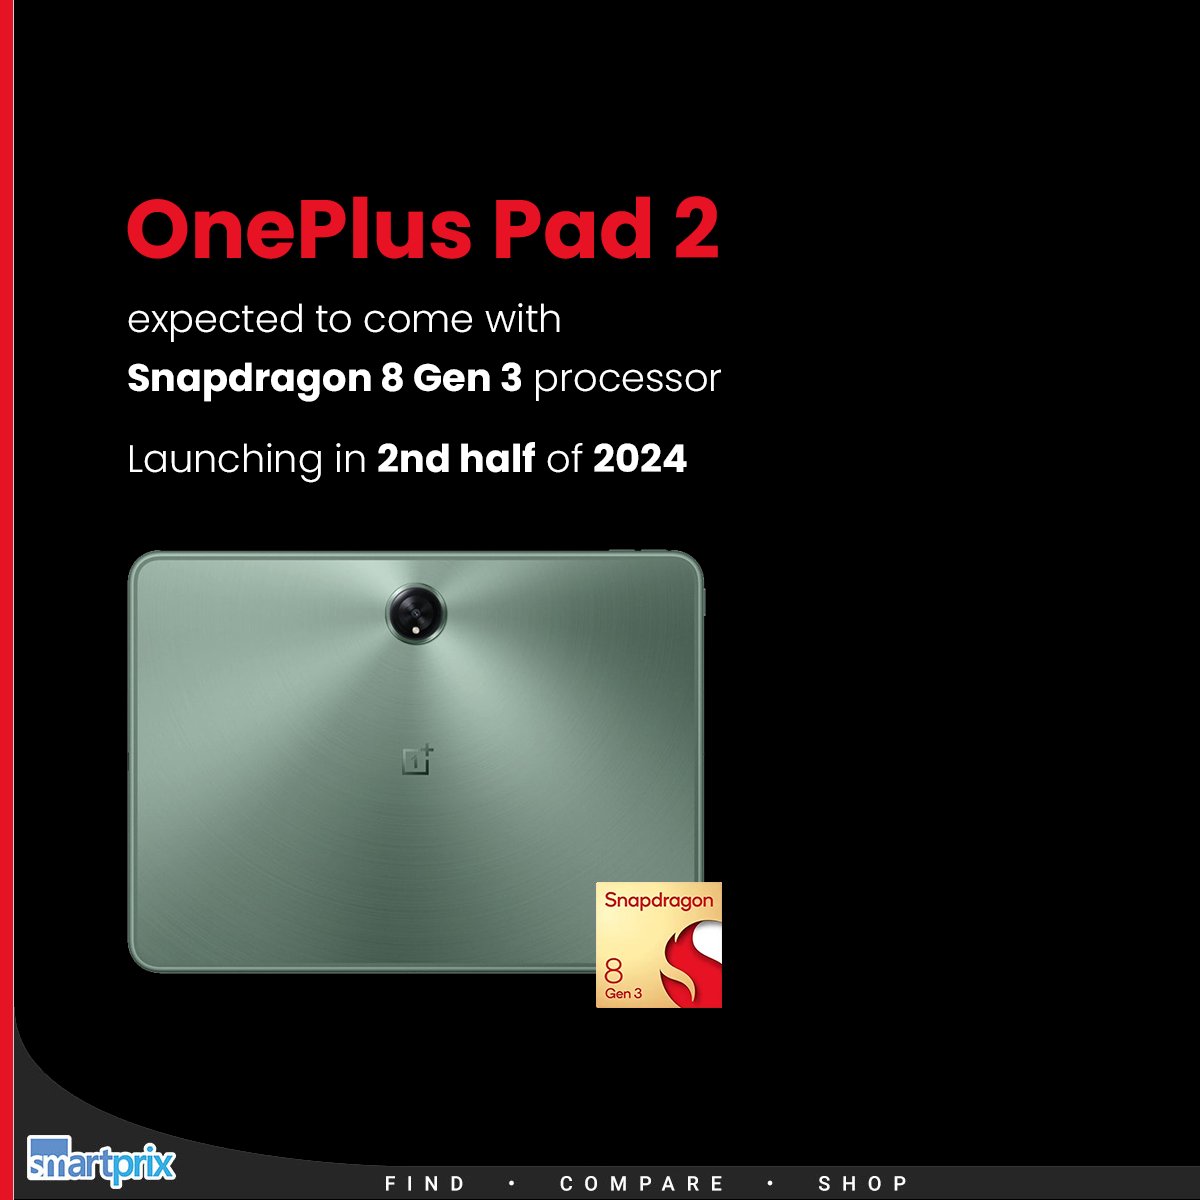 OnePlus Pad 2 with Snapdragon 8 Gen 3 will be a game-changing upgrade smpx.to/g8gPps

#OnePlus #OnePlusPad2 #Tablet #Snapdragon8Gen3